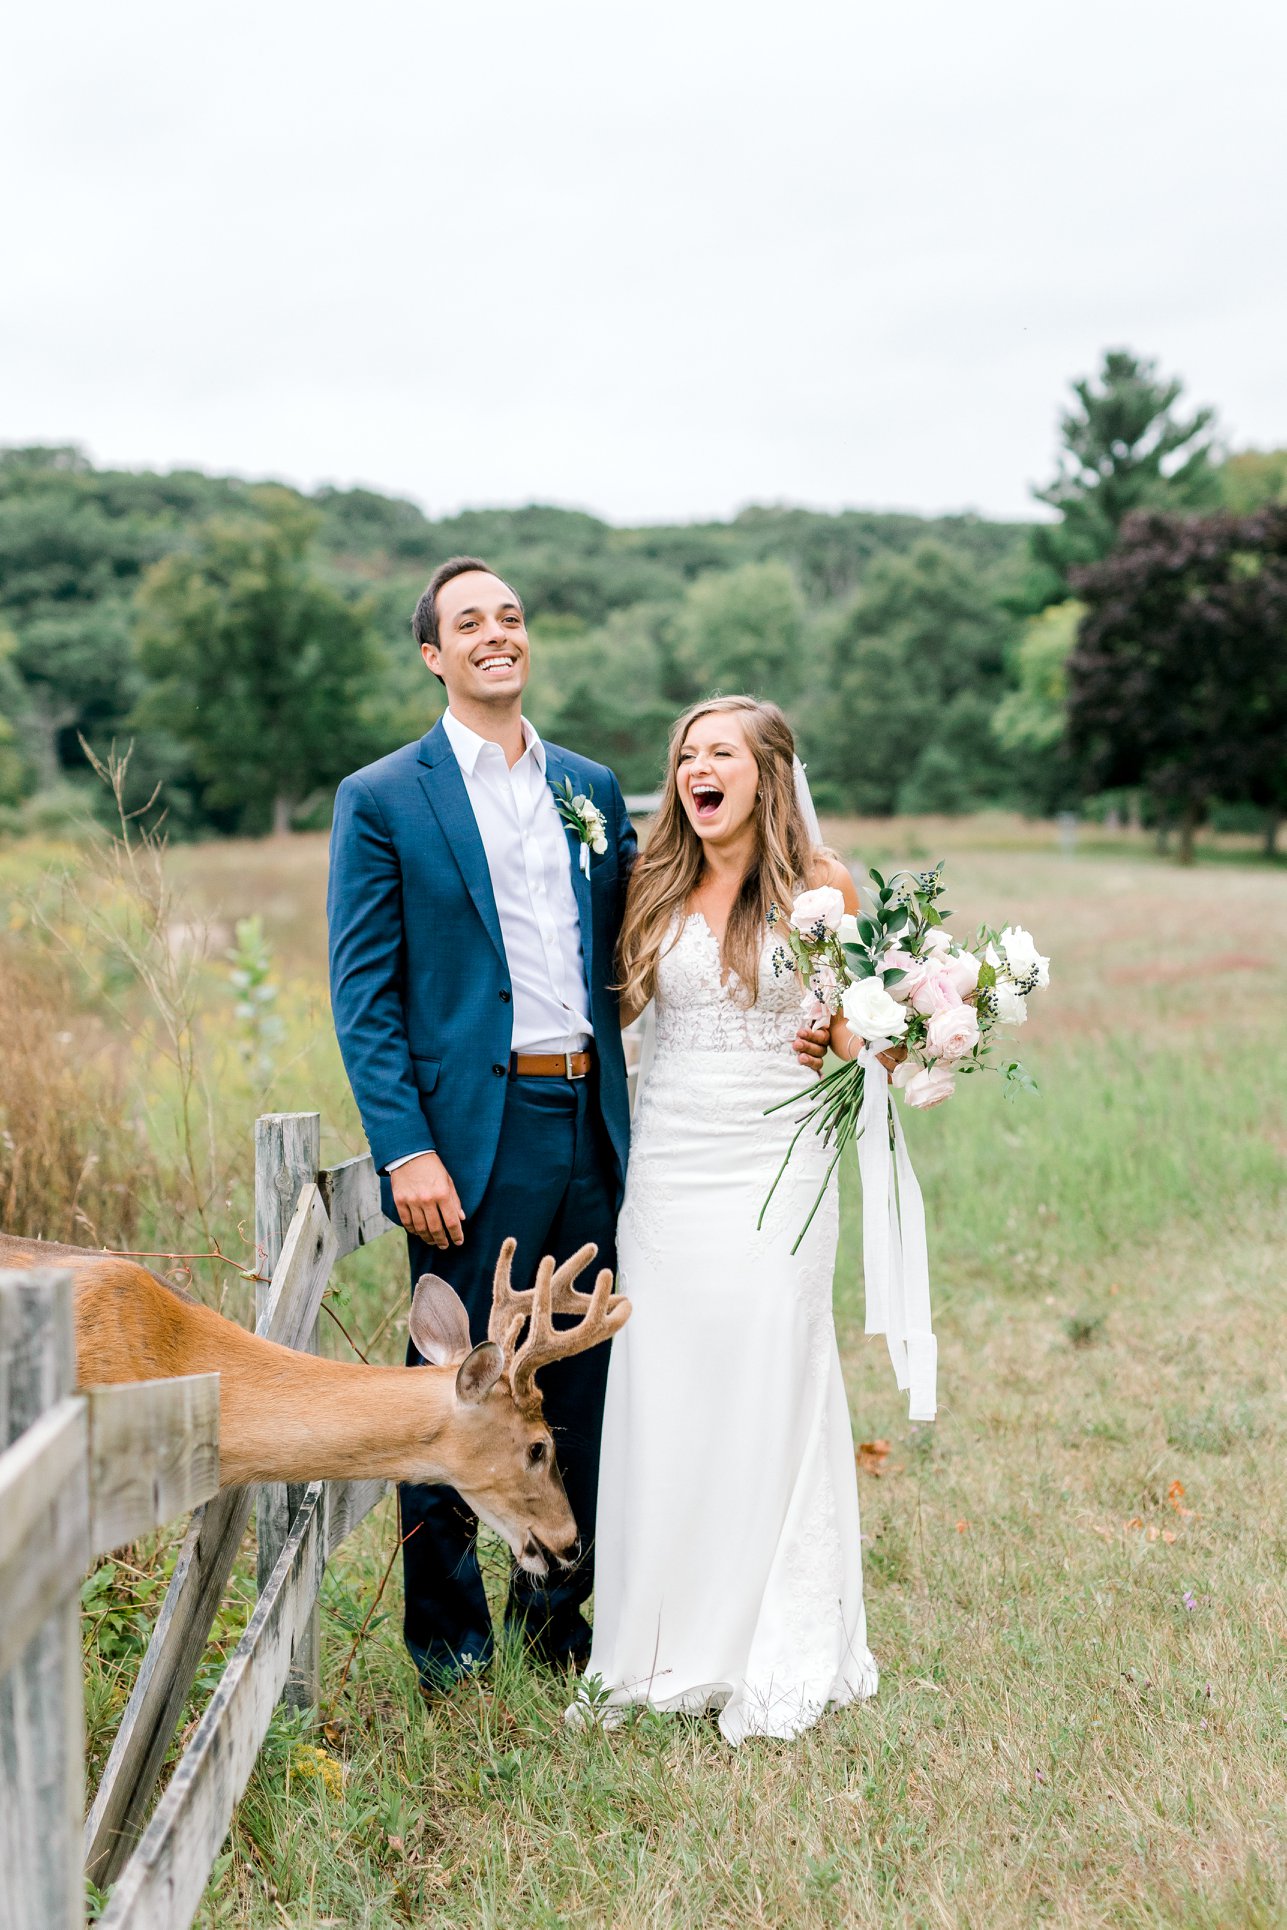 PHOTO: Morgan and Luke Mackley were surprised by a deer while their wedding photos were being taken.